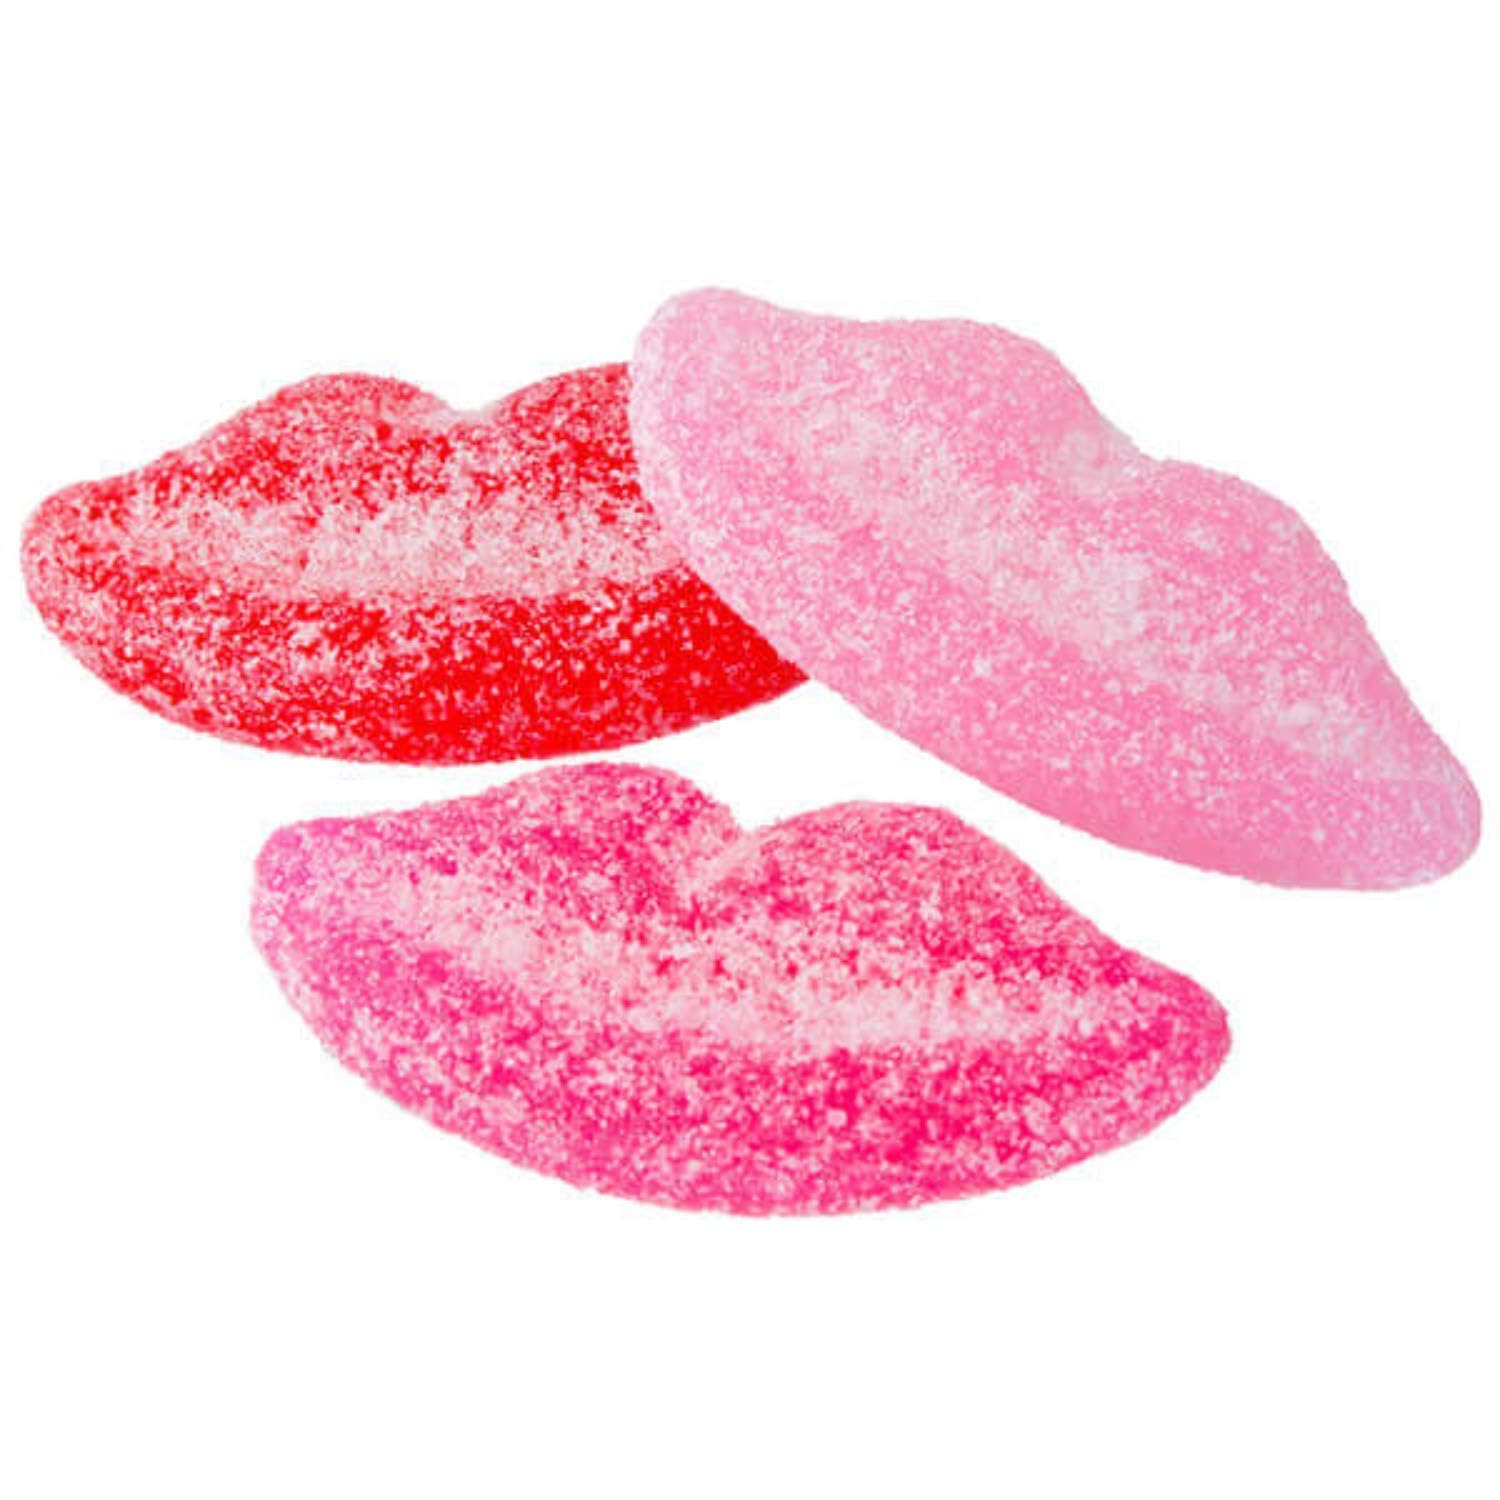 By The Cup Sour Pucker-up Gummy Lips, 1 Lb : Grocery & Gourmet Food